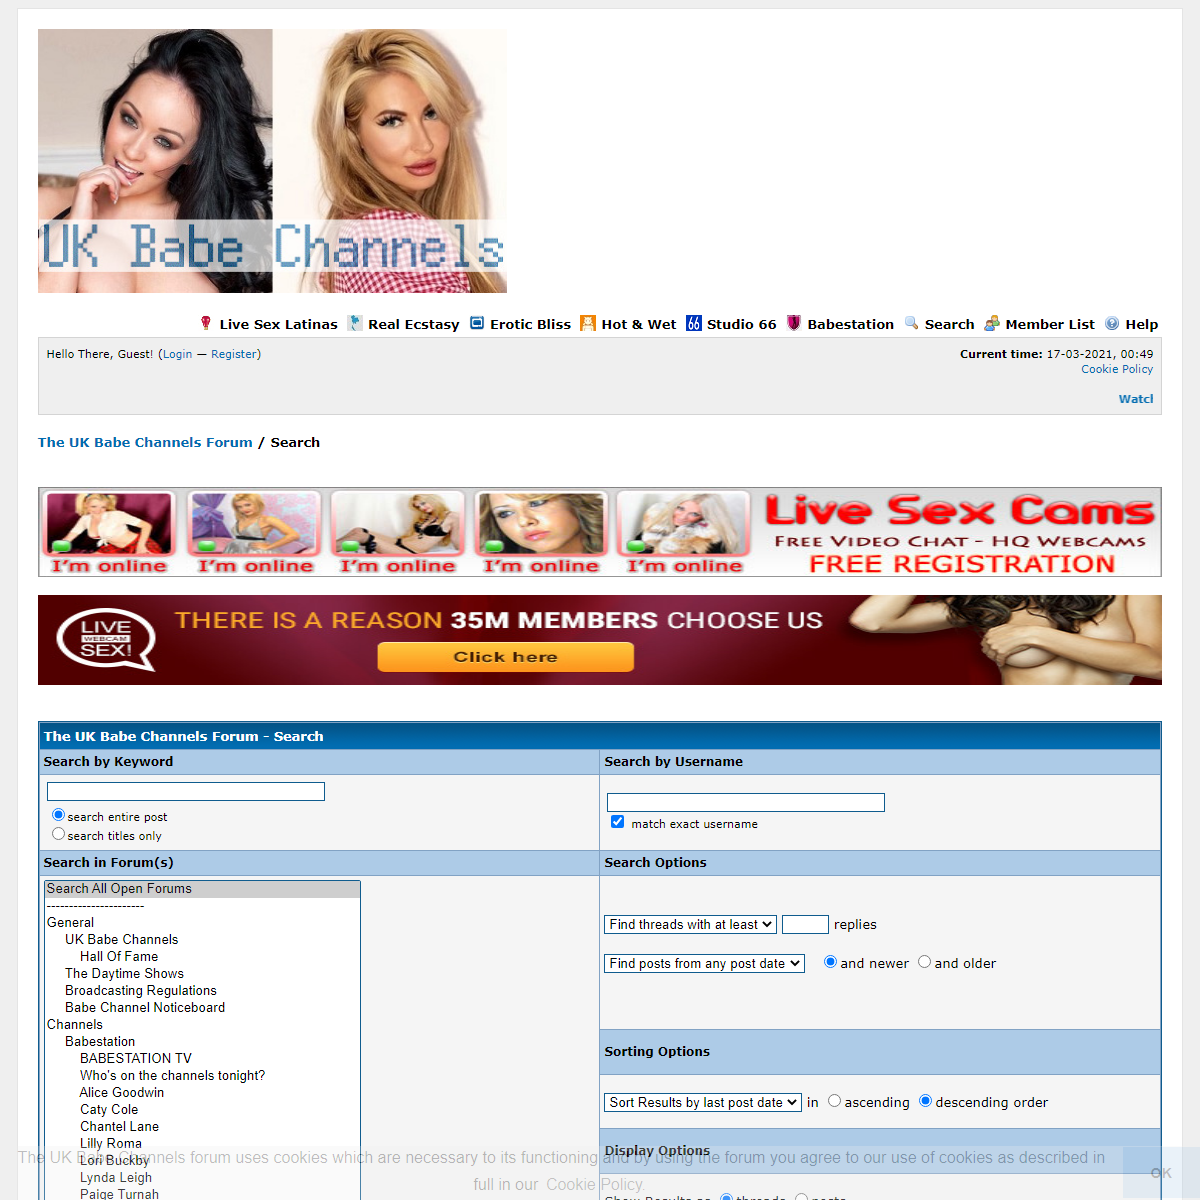 The UK Babe Channels Forum - Search